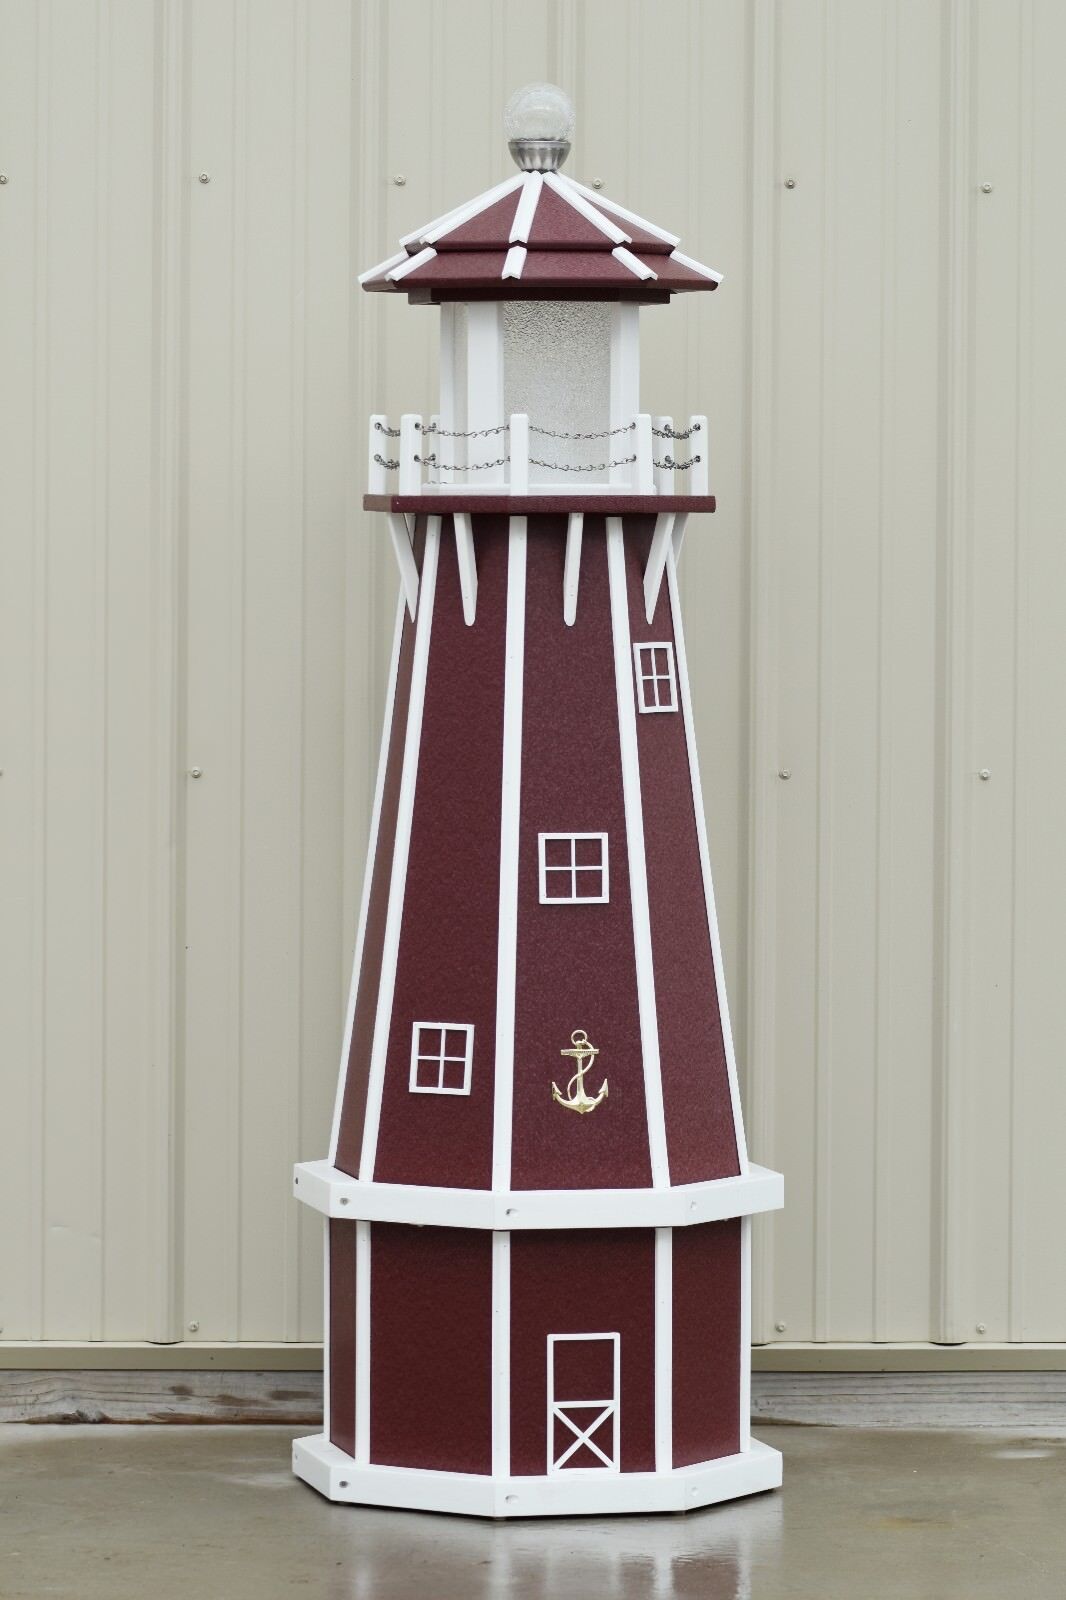 5\' Octagon Handcrafted Polywood Lighthouse (cherry/white trim)